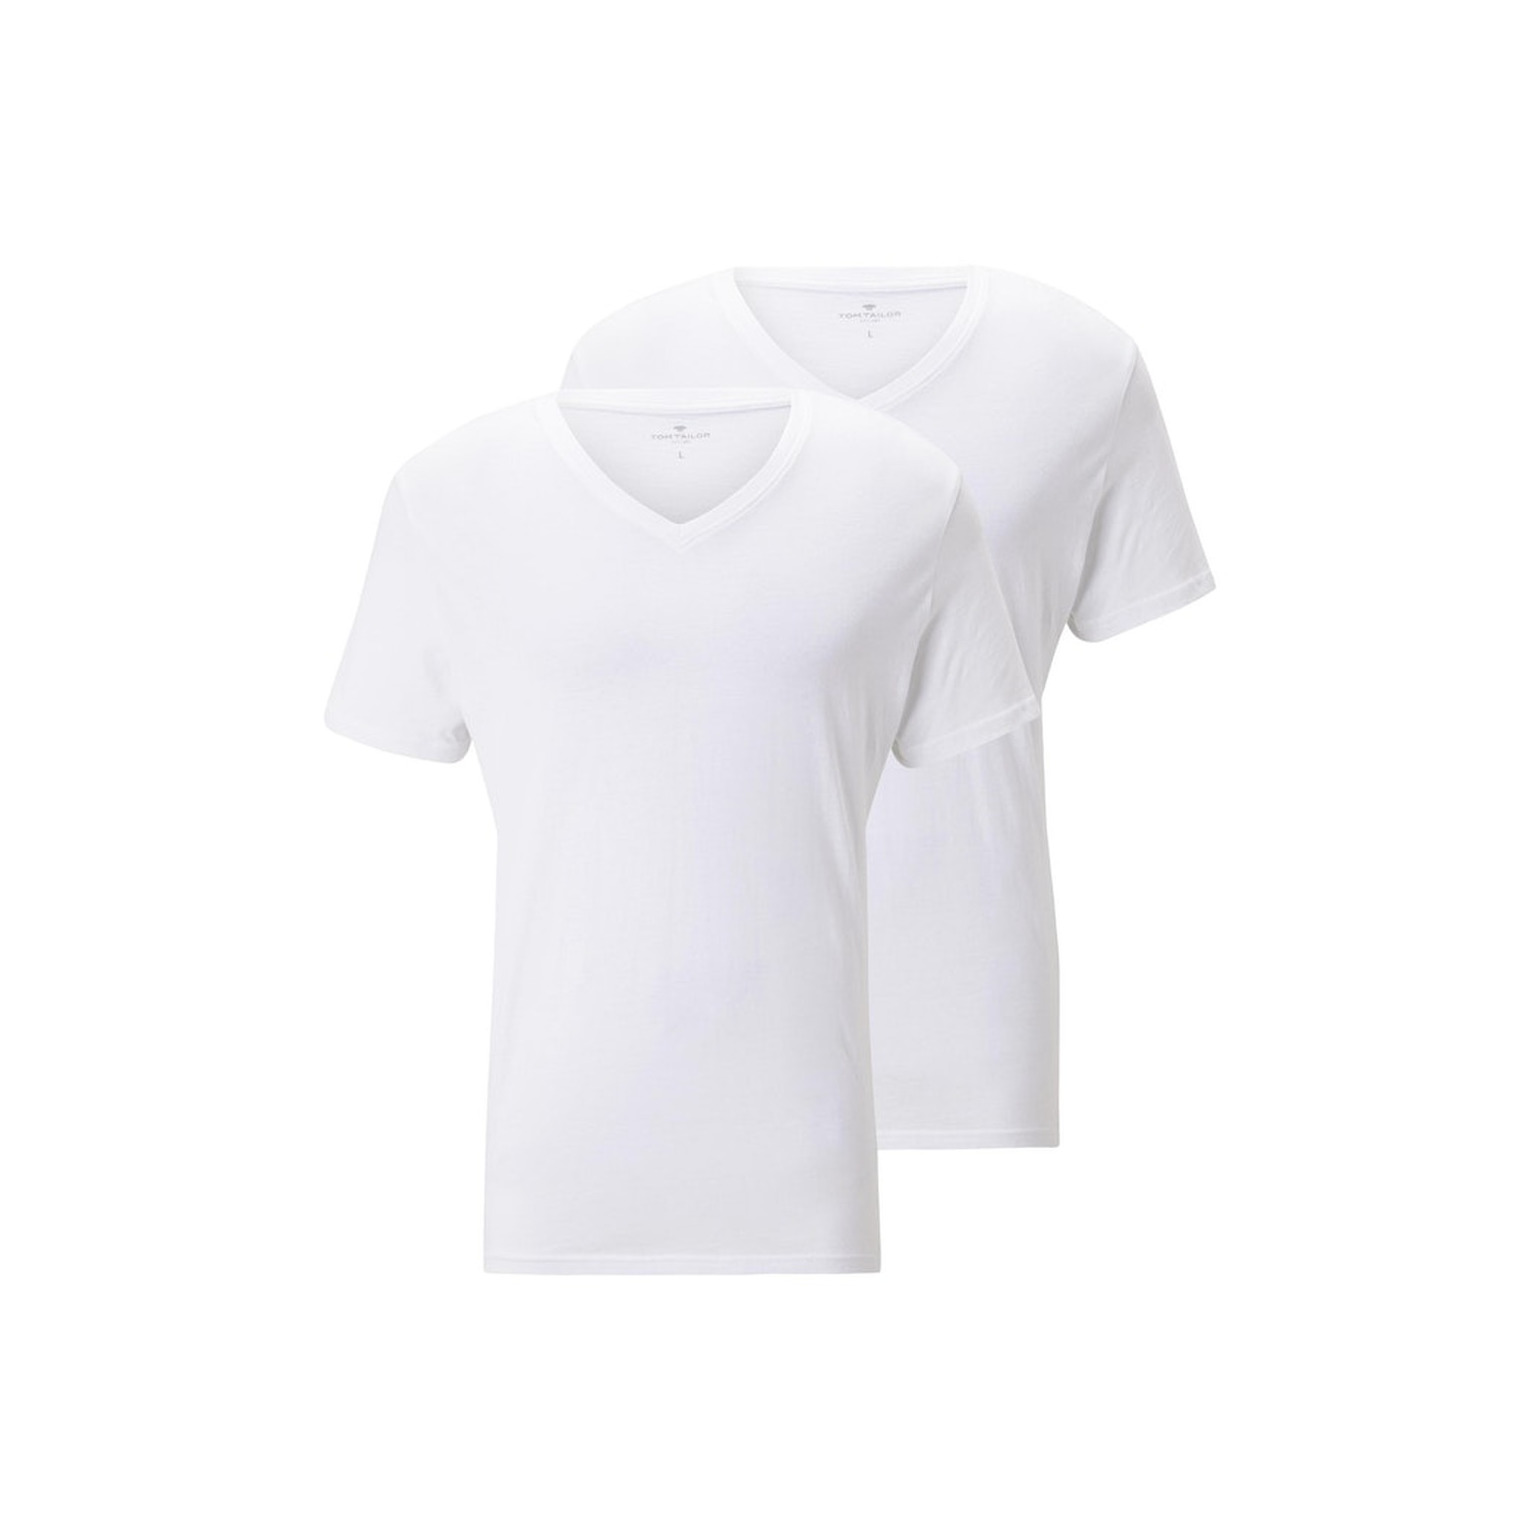 TOM TAILOR double pack v- neck tee Shirts | Schuh Mücke